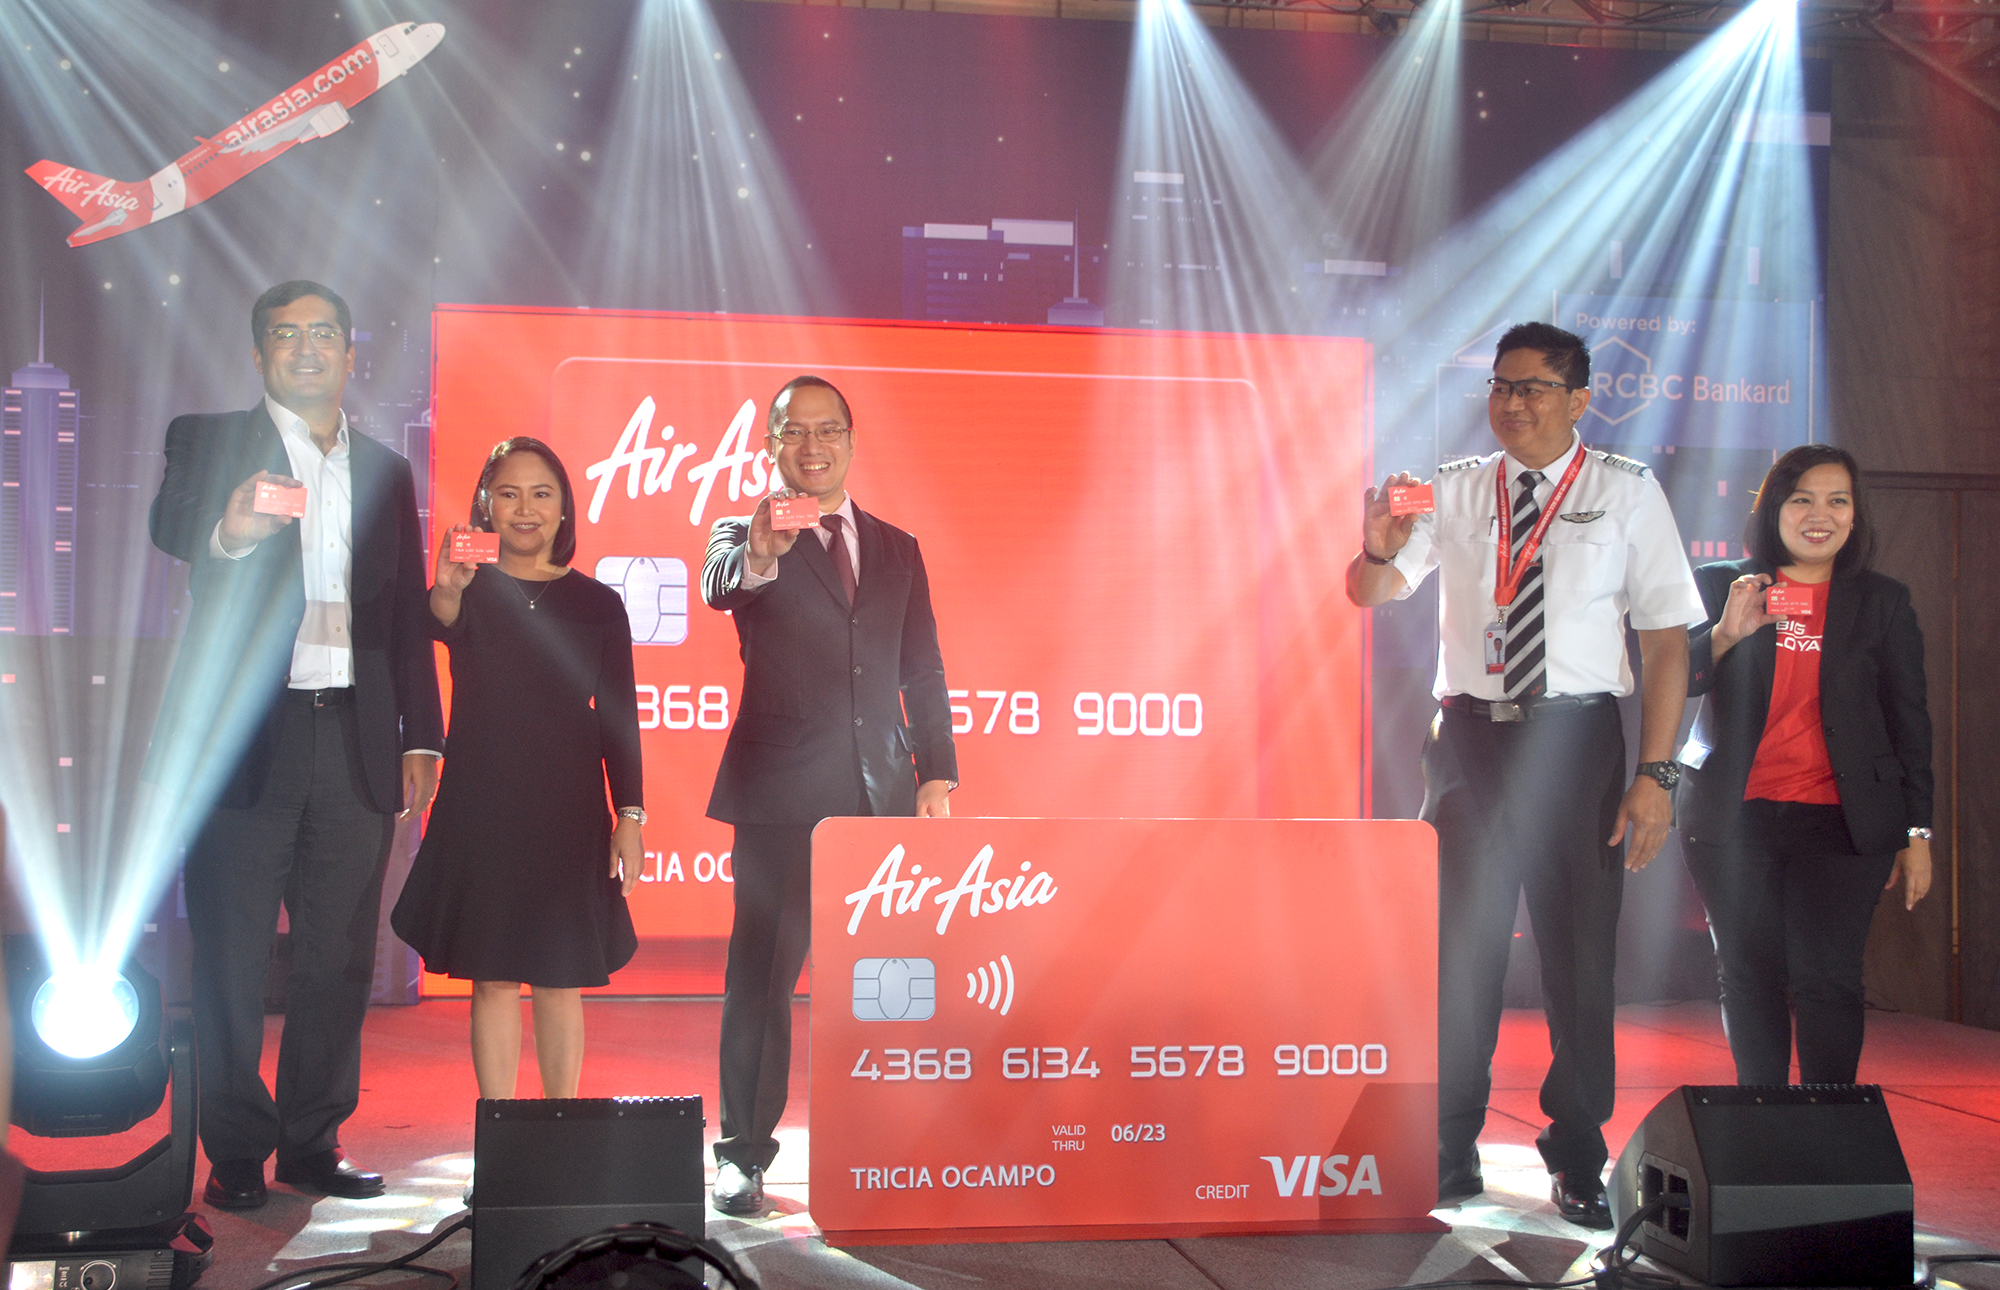 Prepare to take off with the new Air Asia Credit Card